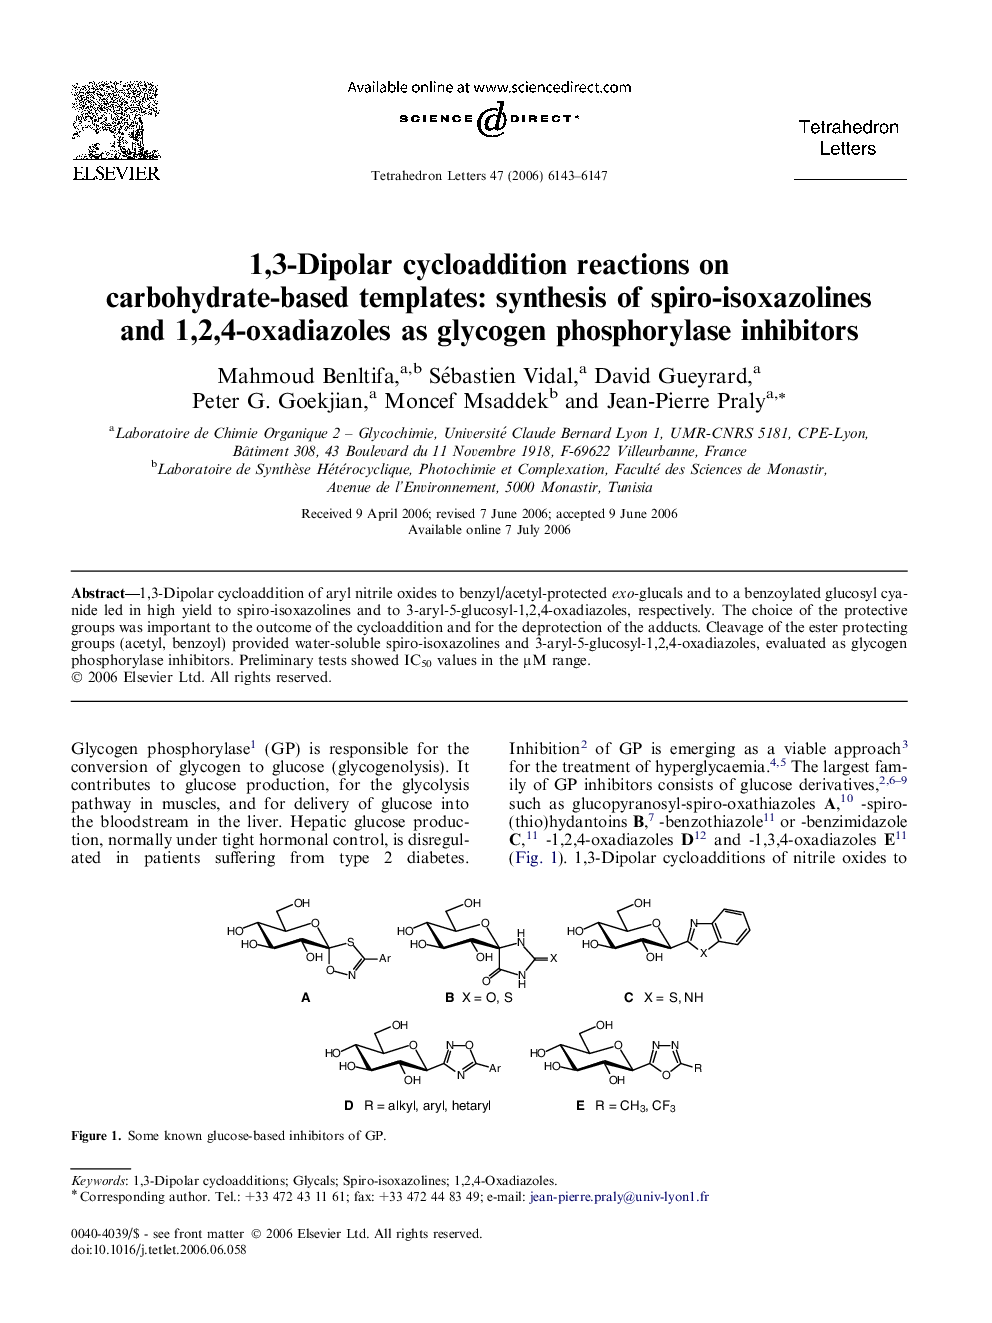 1,3-Dipolar cycloaddition reactions on carbohydrate-based templates: synthesis of spiro-isoxazolines and 1,2,4-oxadiazoles as glycogen phosphorylase inhibitors